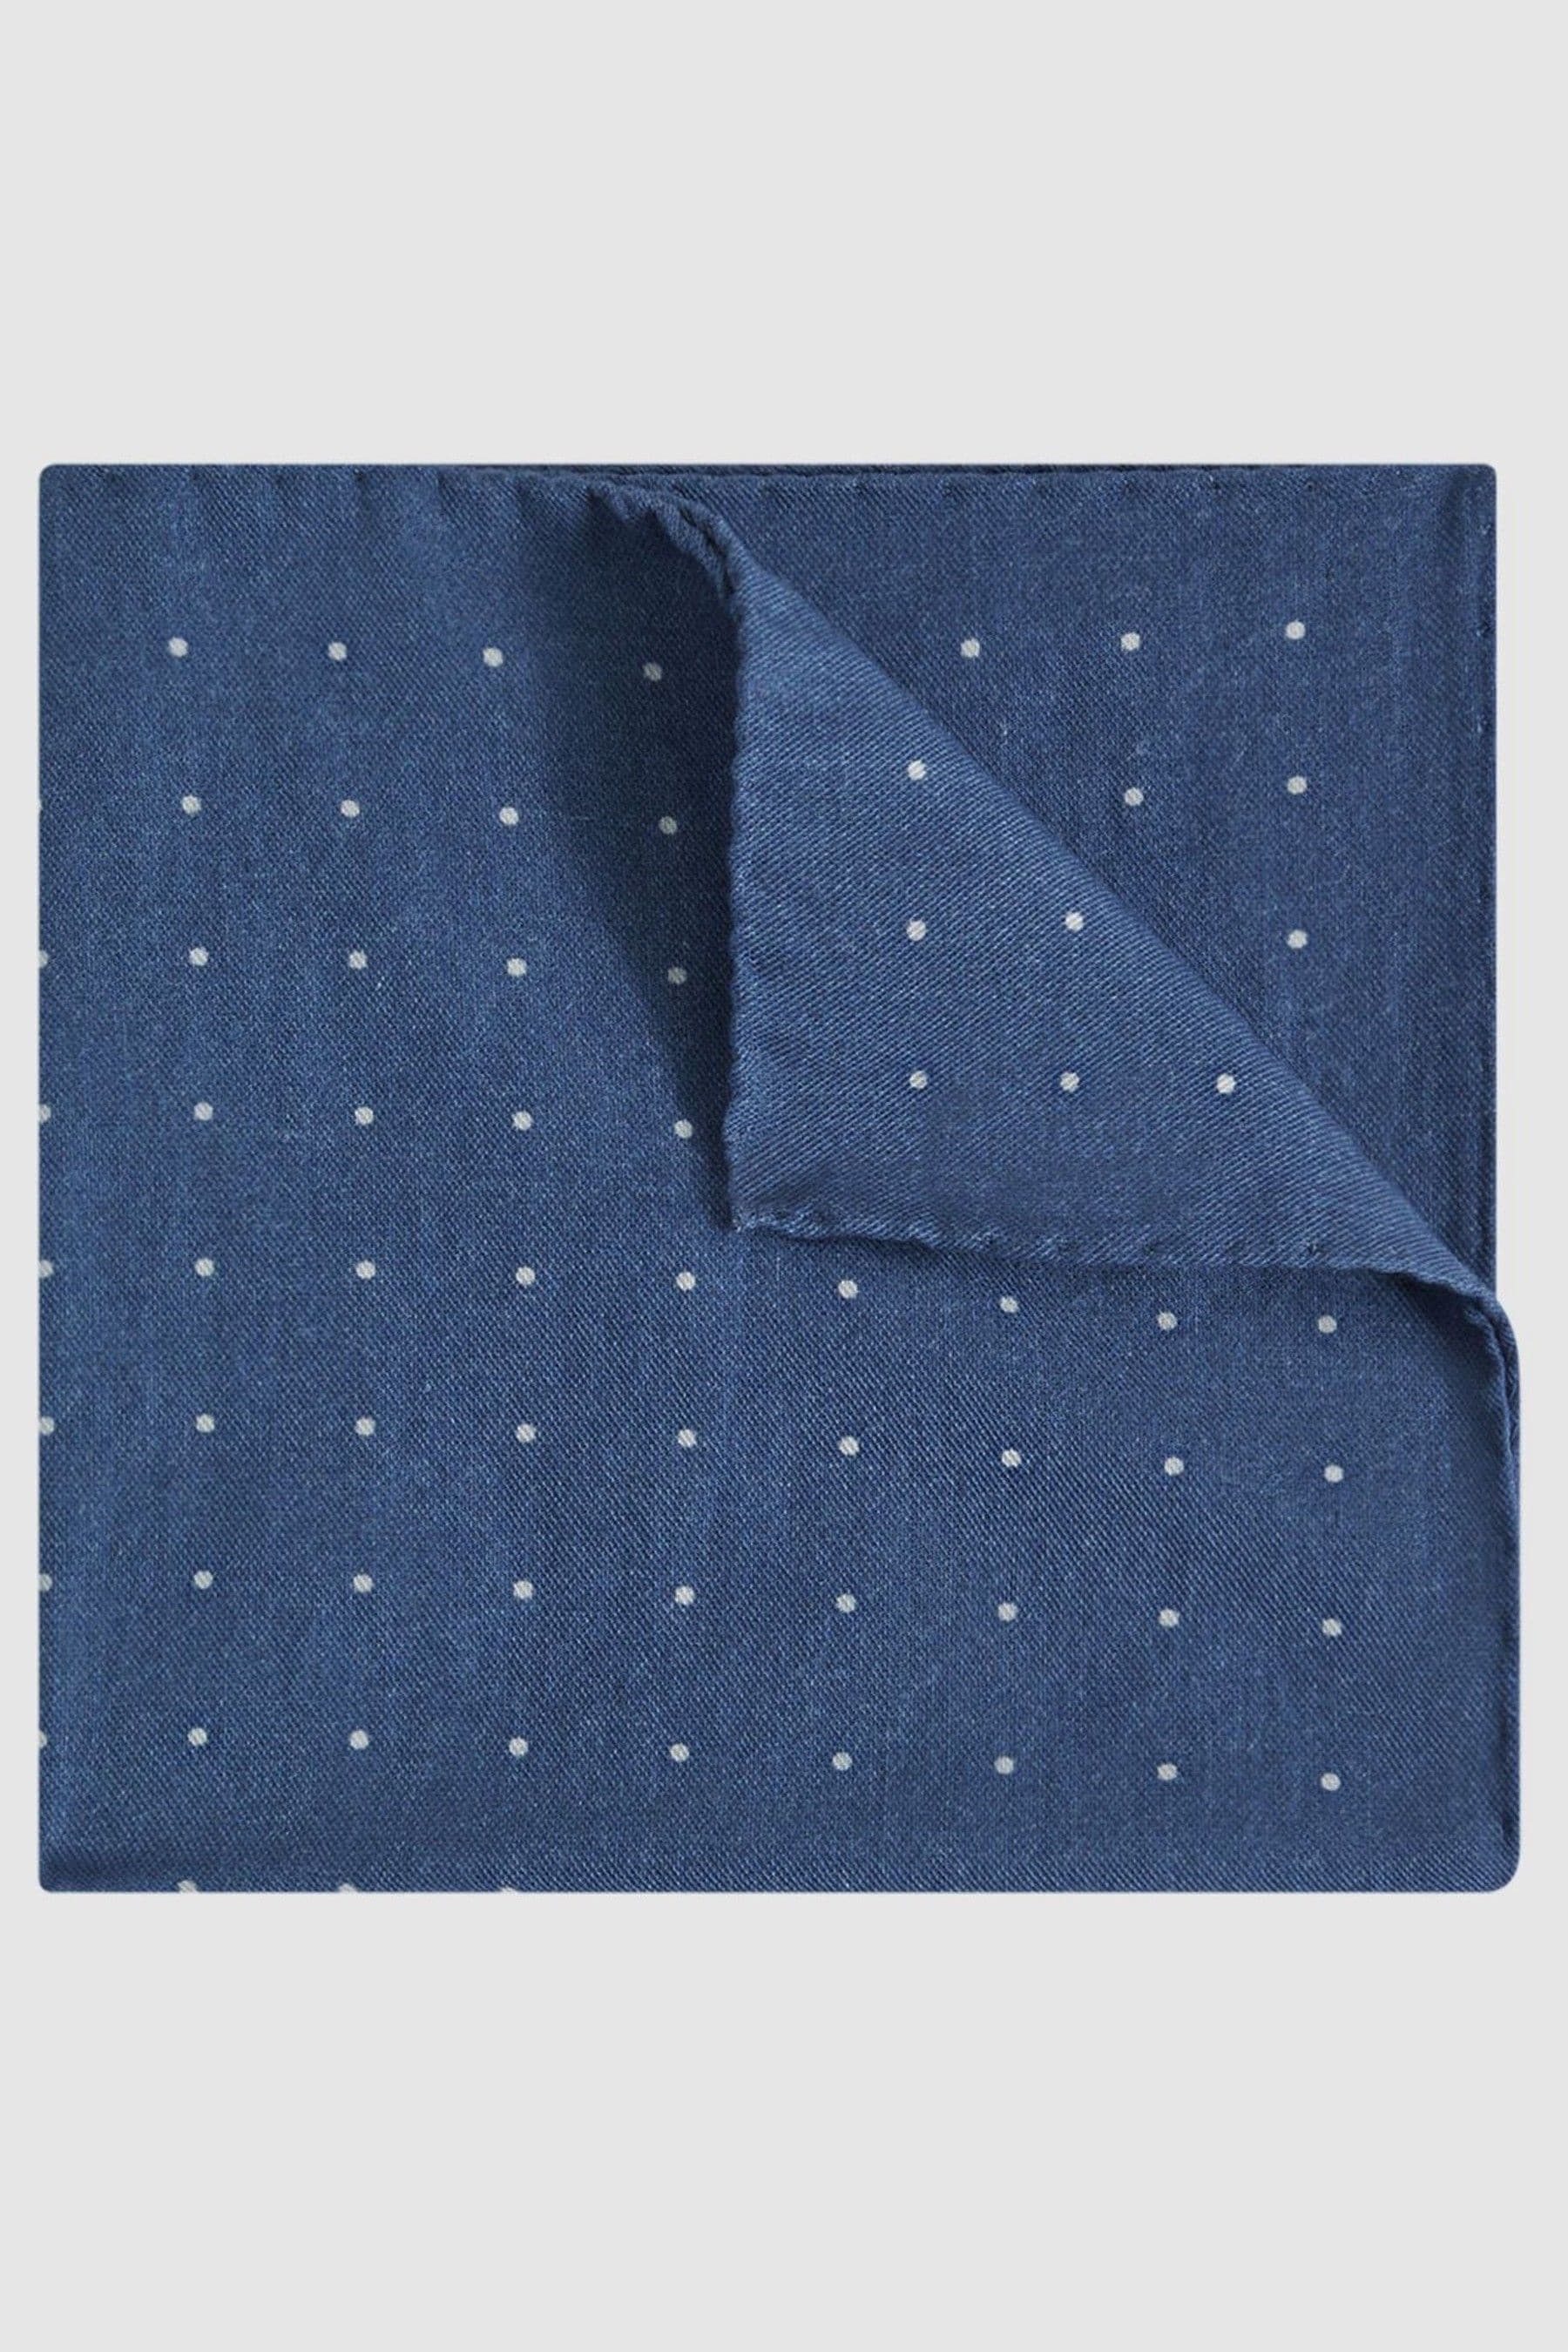 Reiss Tuscan - Airforce Blue Cotton-wool Polka Dot Pocket Square, One